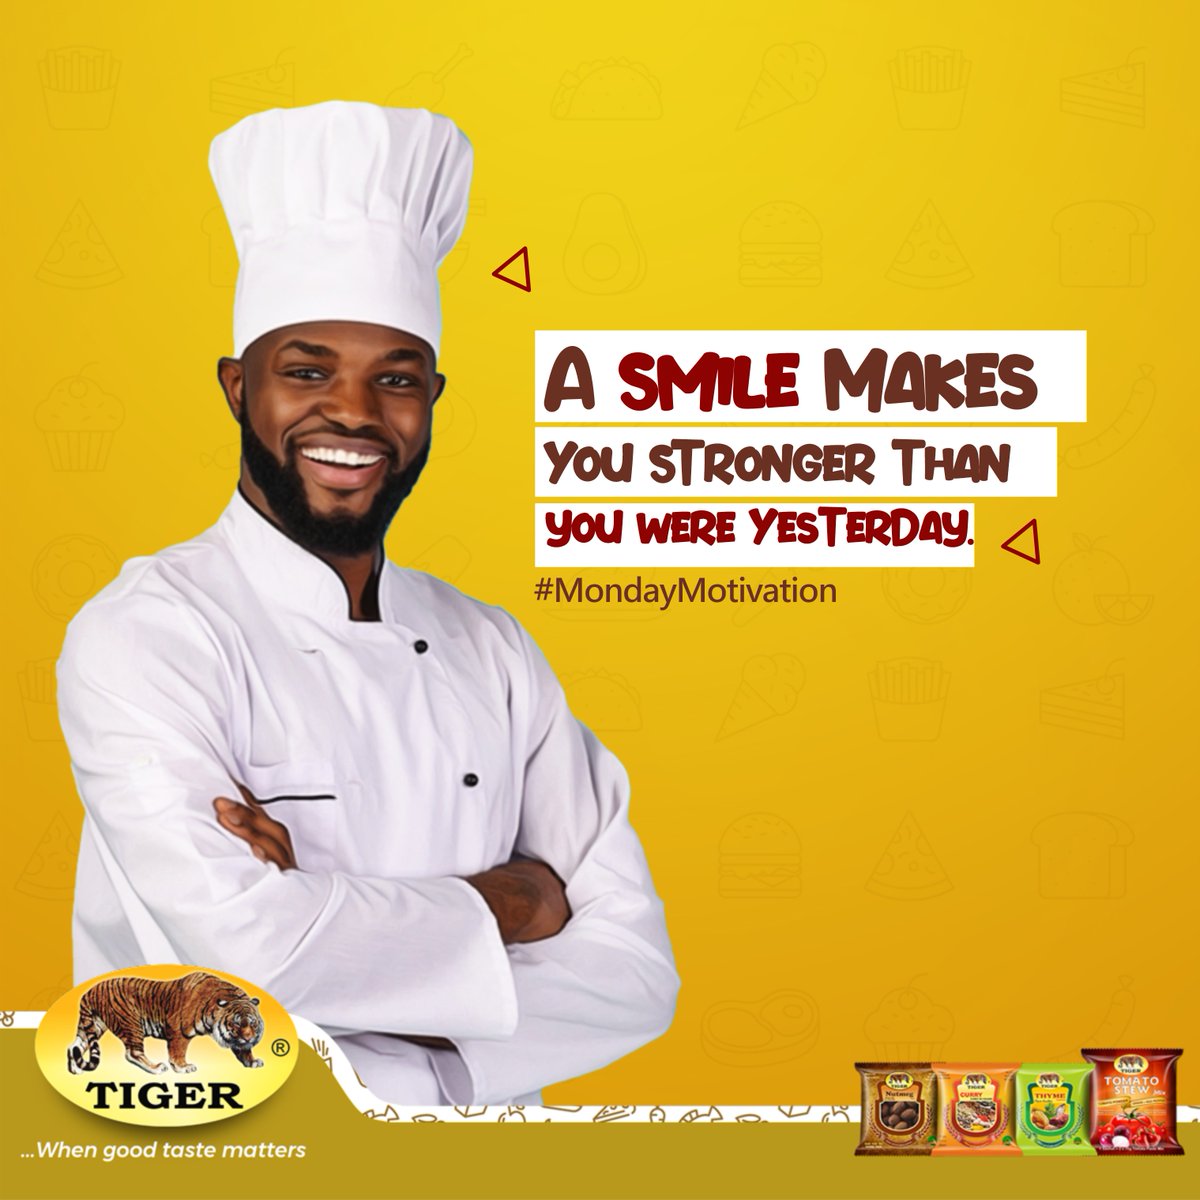 The easiest way to change your outlook toward each day is to smile. 
It's Monday! Start the day with a smile 😀

#MondayMotivation #TigerSpices #WhenGoodTasteMatters #Spices #Herbs #HerbsAndSpices